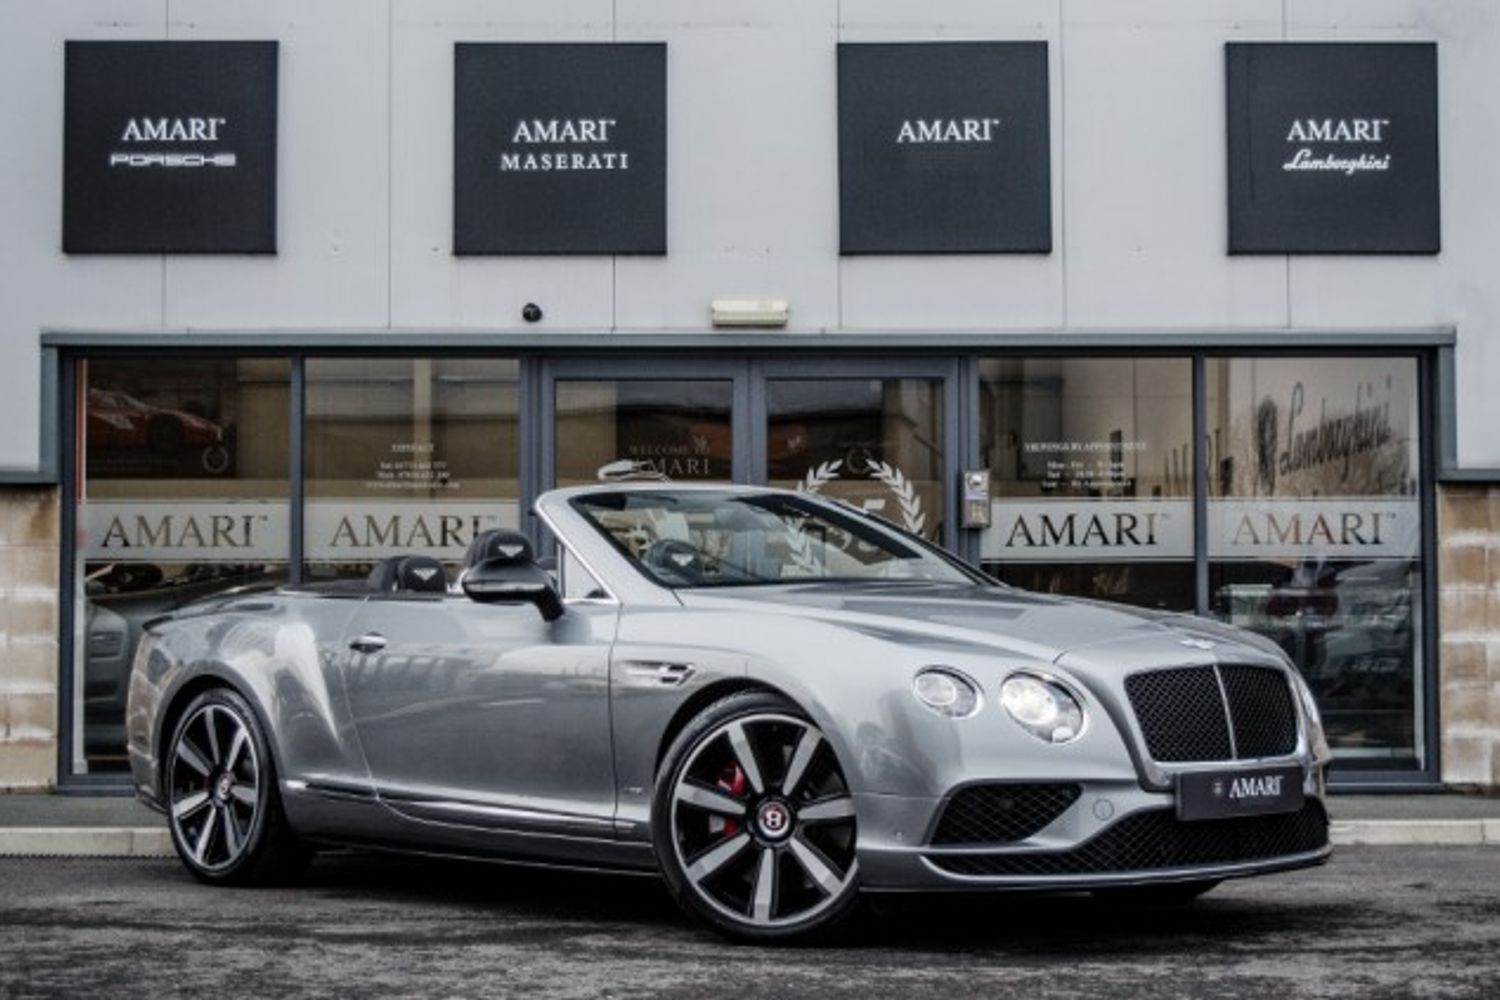 BENTLEY CONTINENTAL GTC CONVERTIBLE 4.0 V8 S MDS 2DR AUTOMATIC